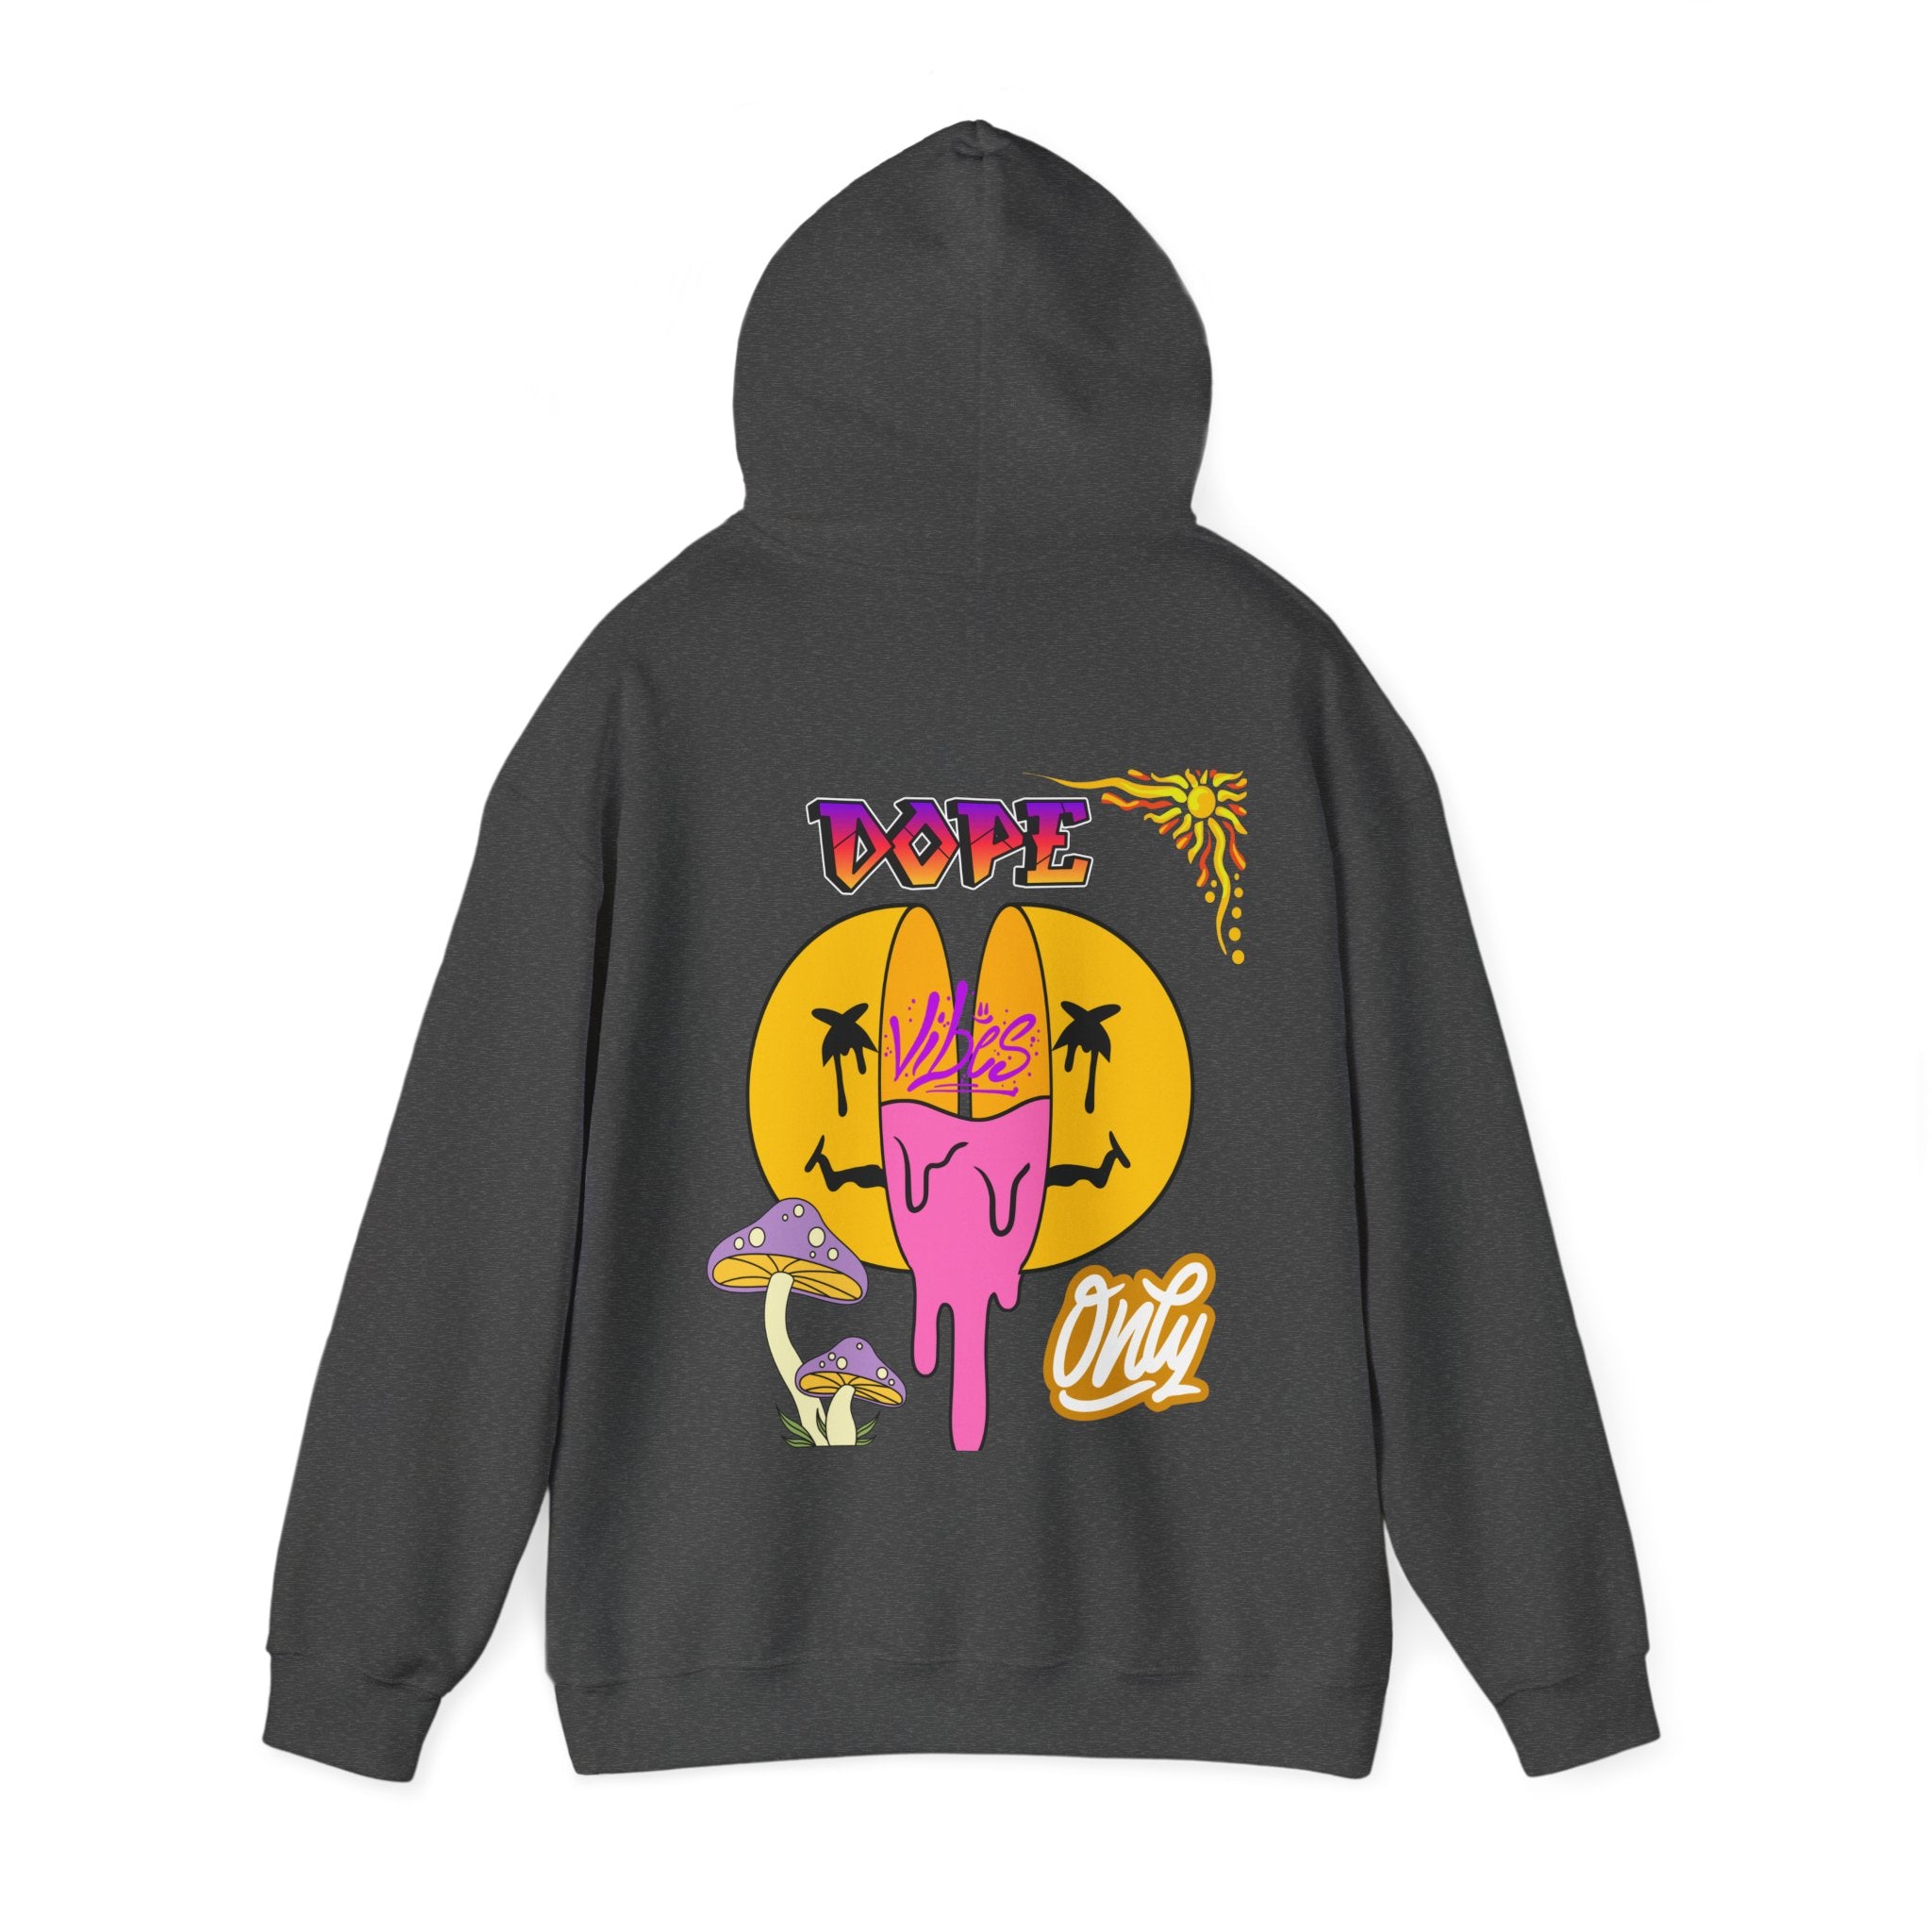 DOPE VIBES ONLY Hoodie